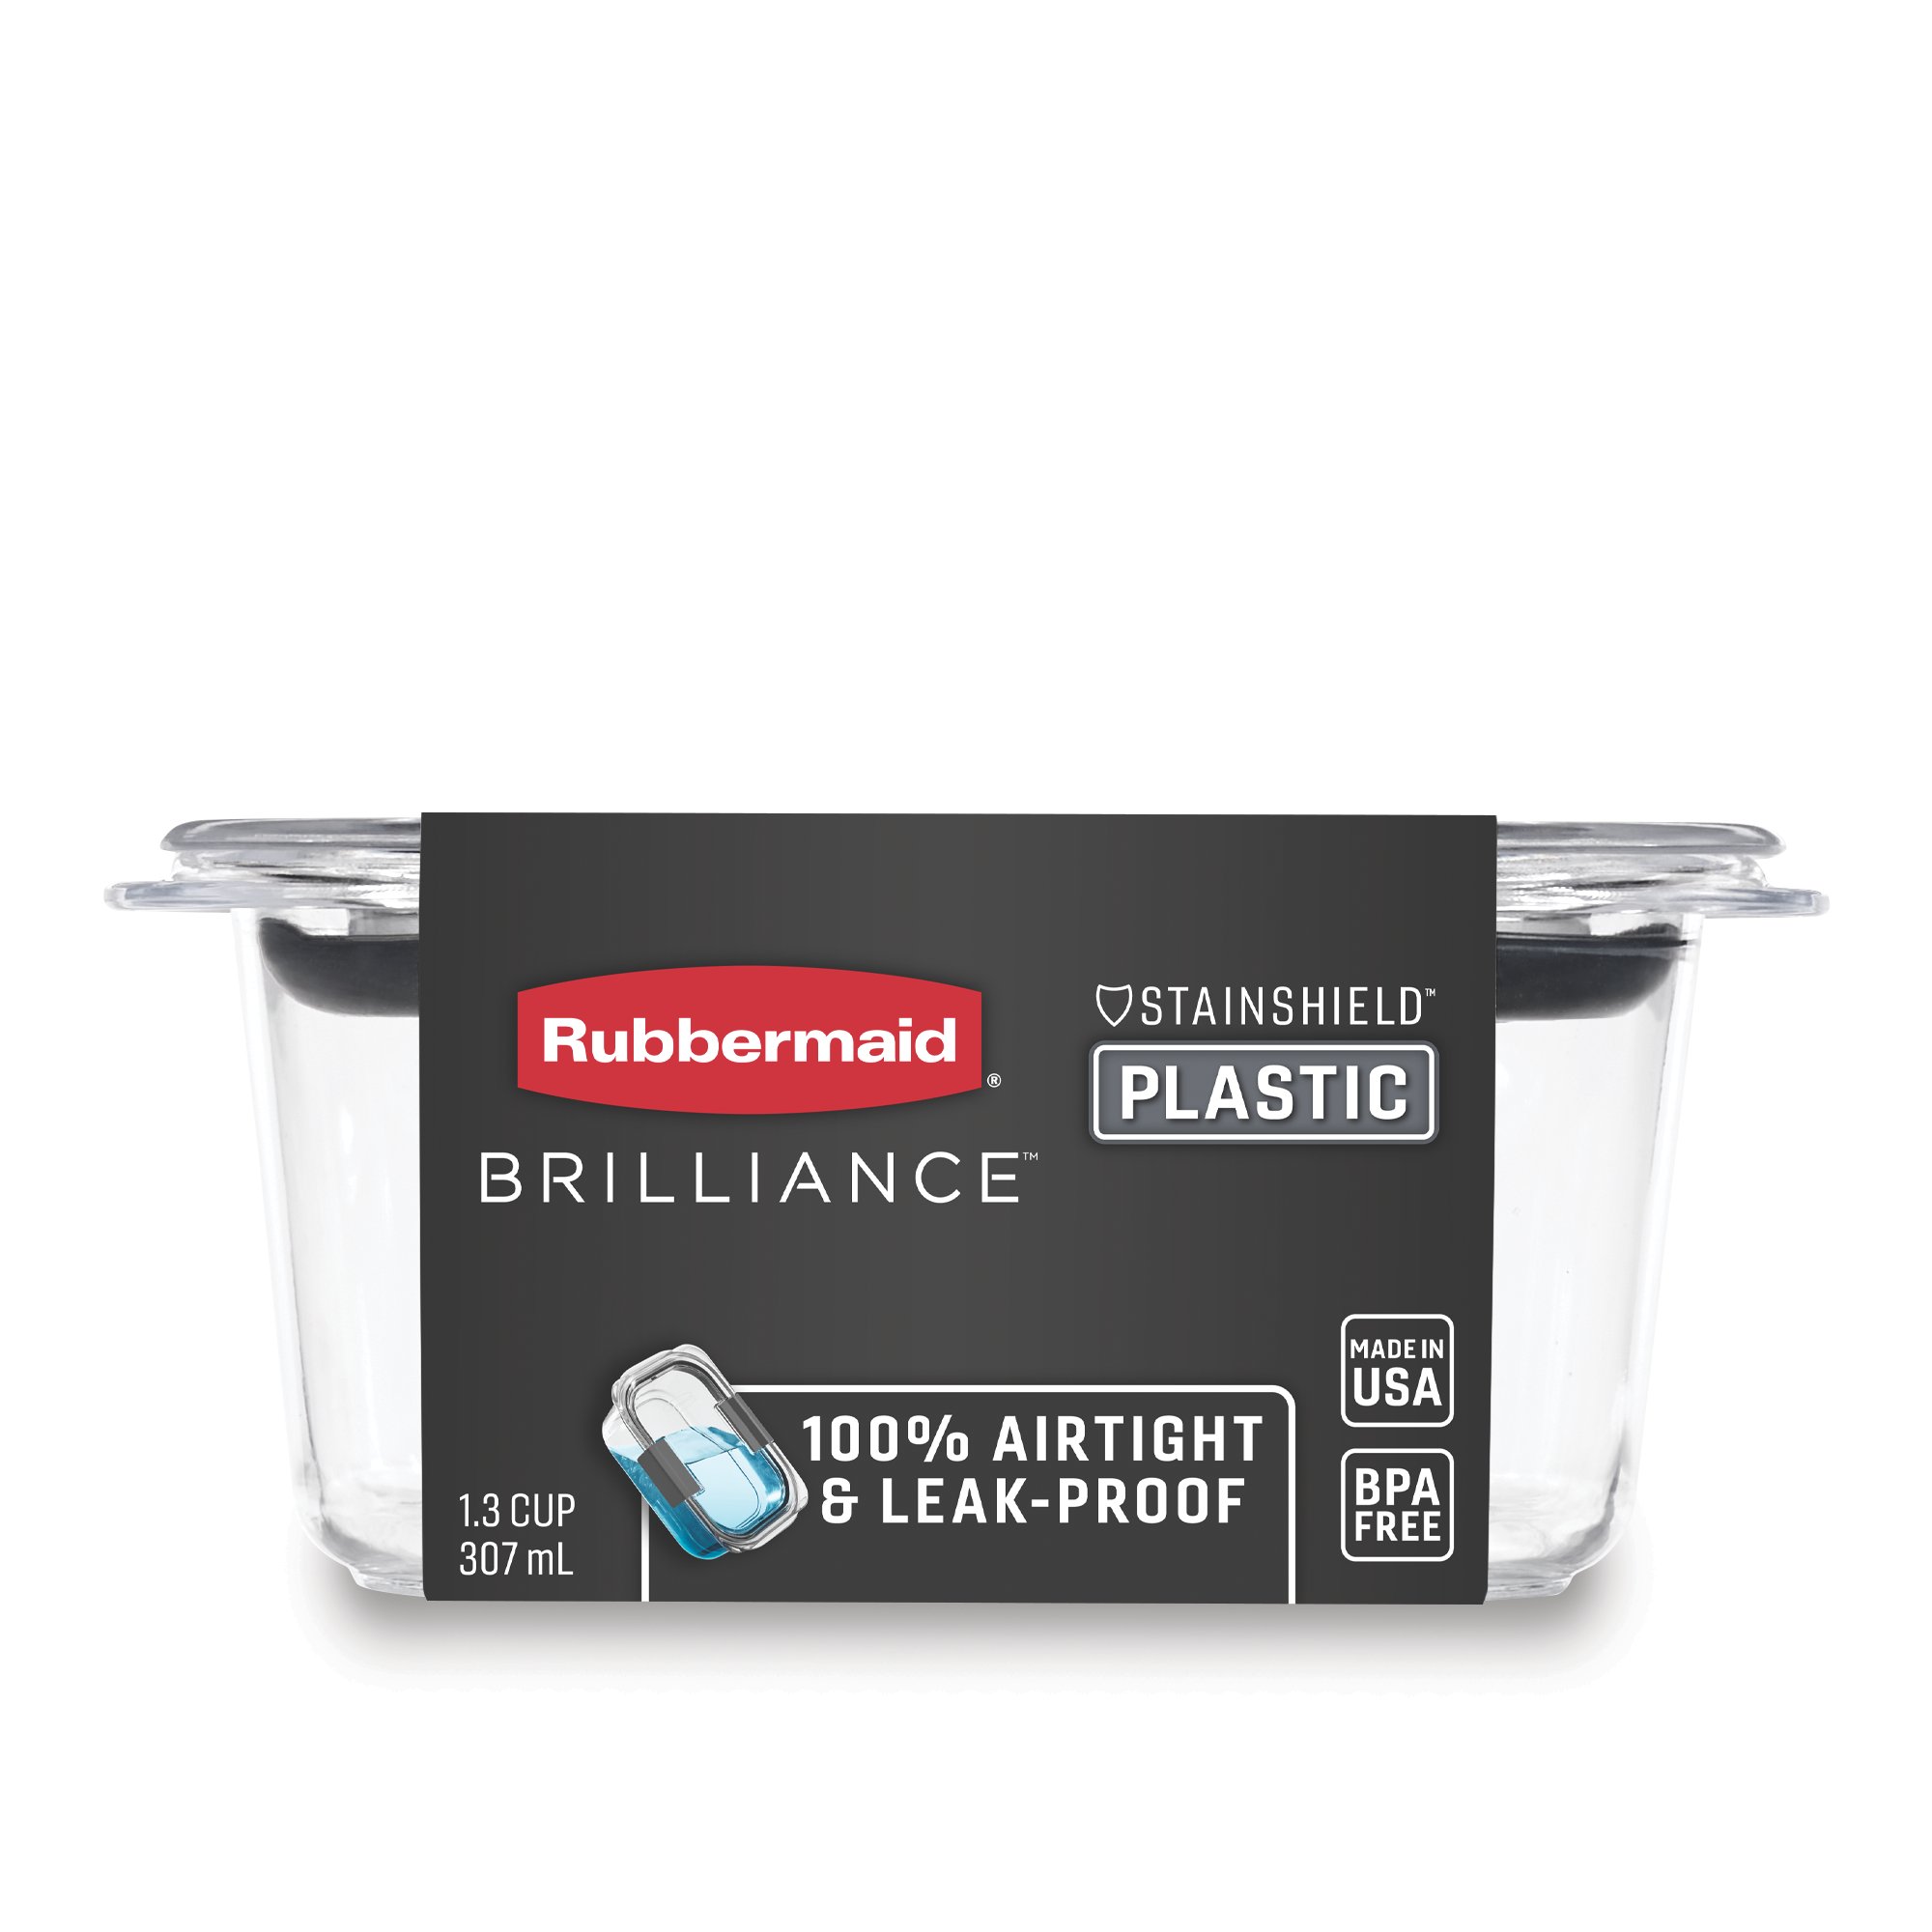 Rubbermaid® Brilliance Glass Rectangular Food Storage Container - Clear,  4.7 c - Baker's